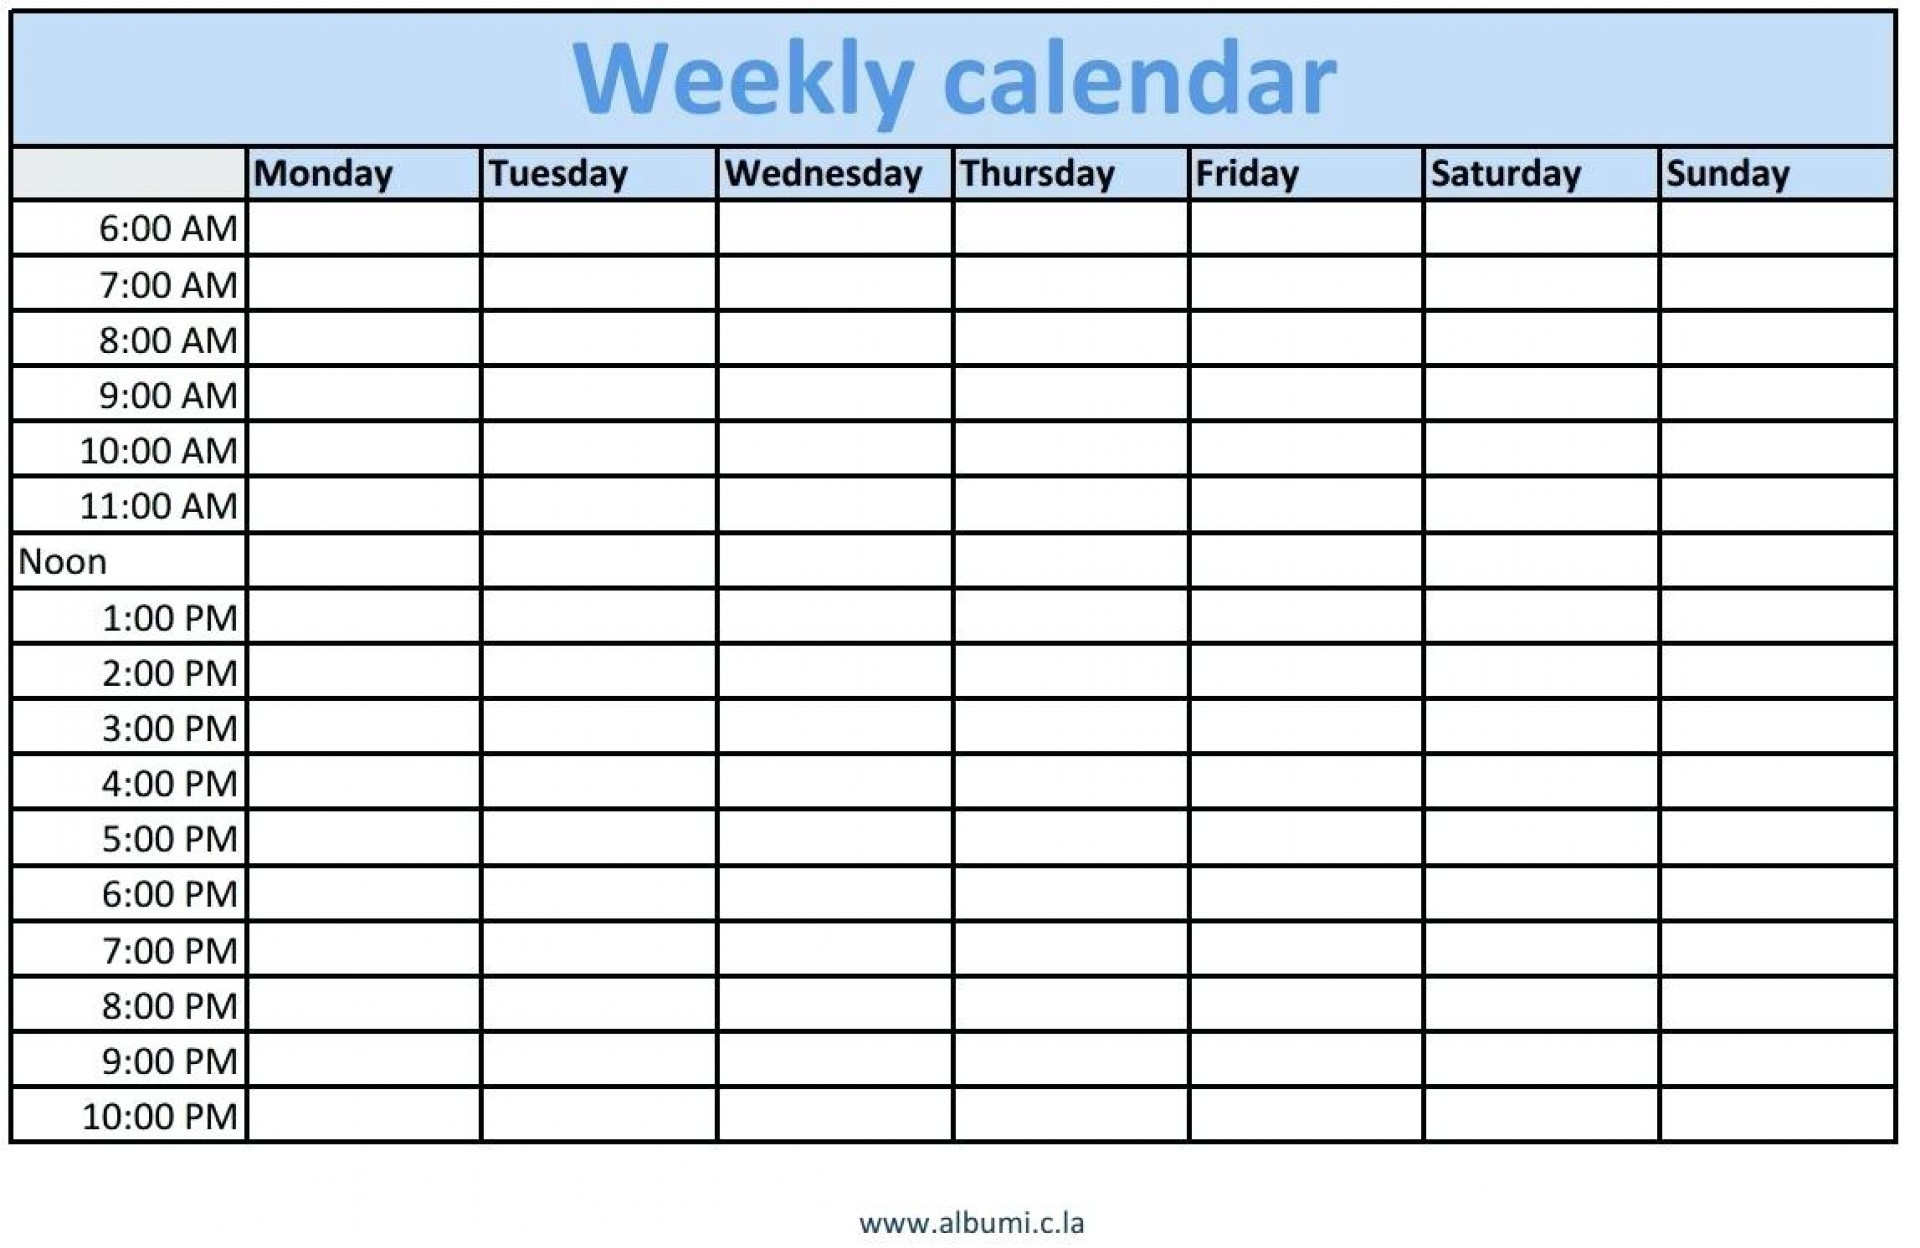 Blank Schedule Template With Time Slots | Example Calendar intended for Weekly Calendar Template With Time Slots